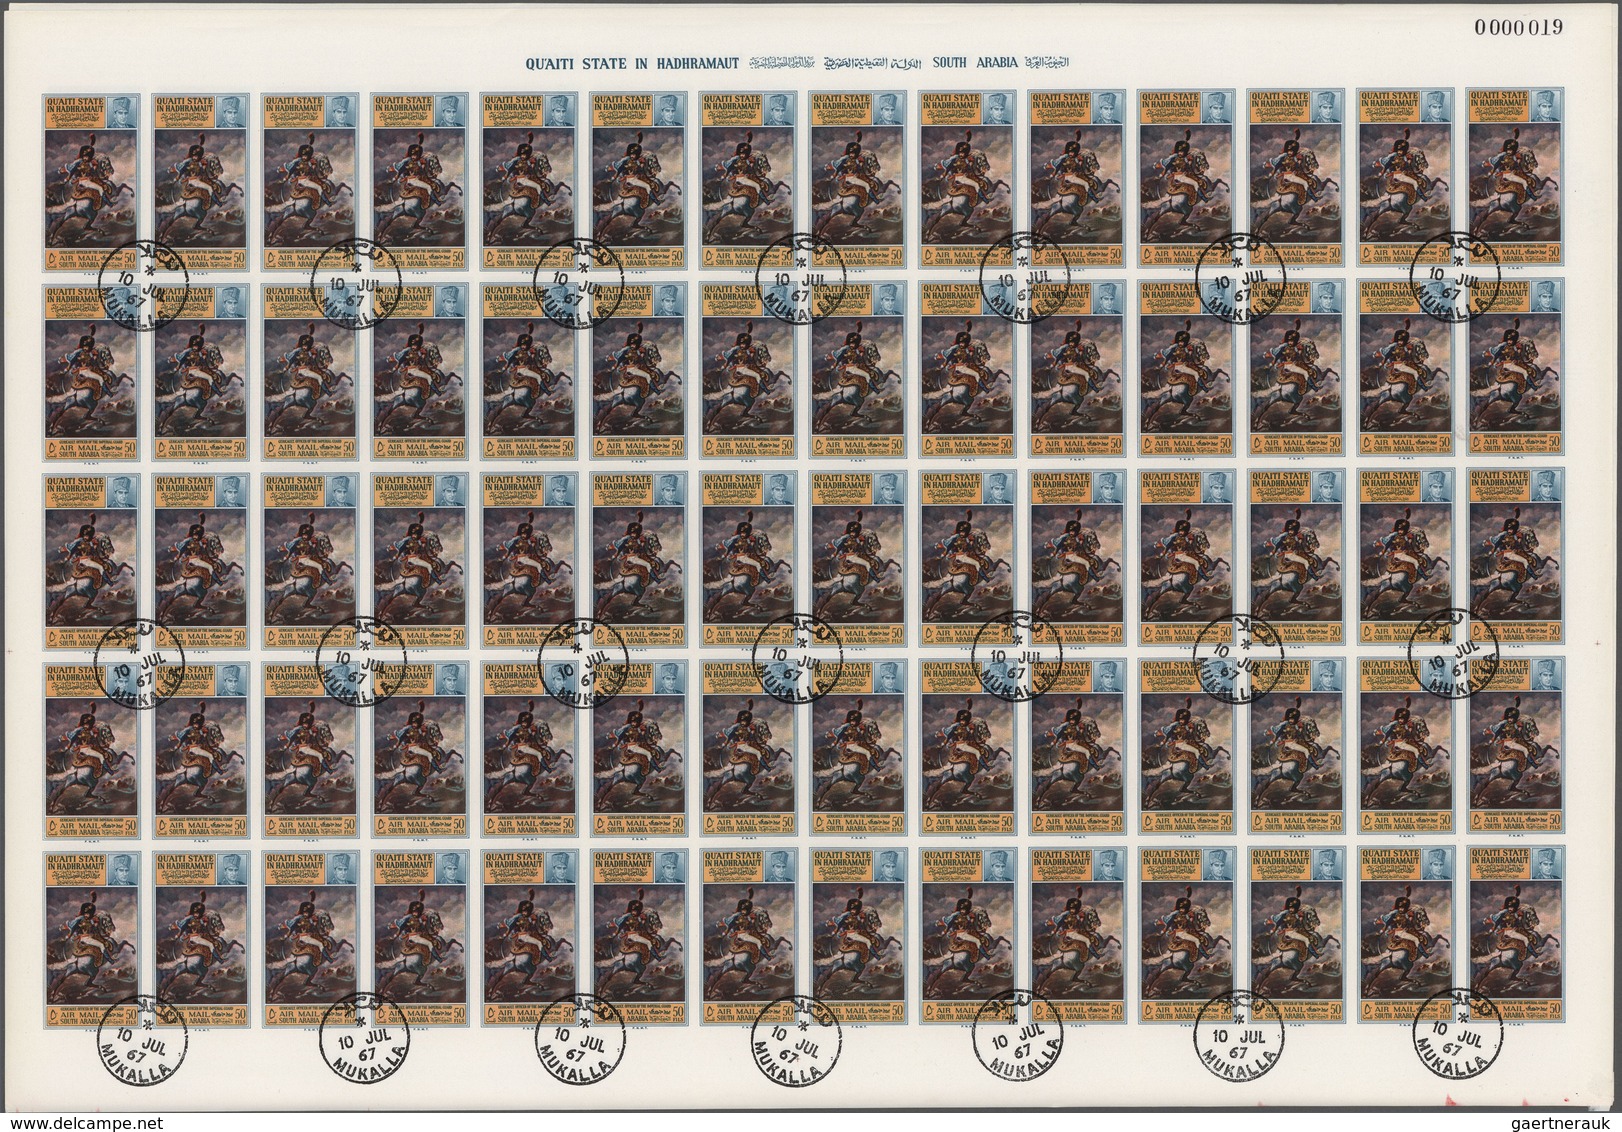 Aden - Qu'aiti State In Hadhramaut: 1967 - PAINTINGS And BOYSCOUTS - 5f. To 65f. Set Of Seven Values - Yémen